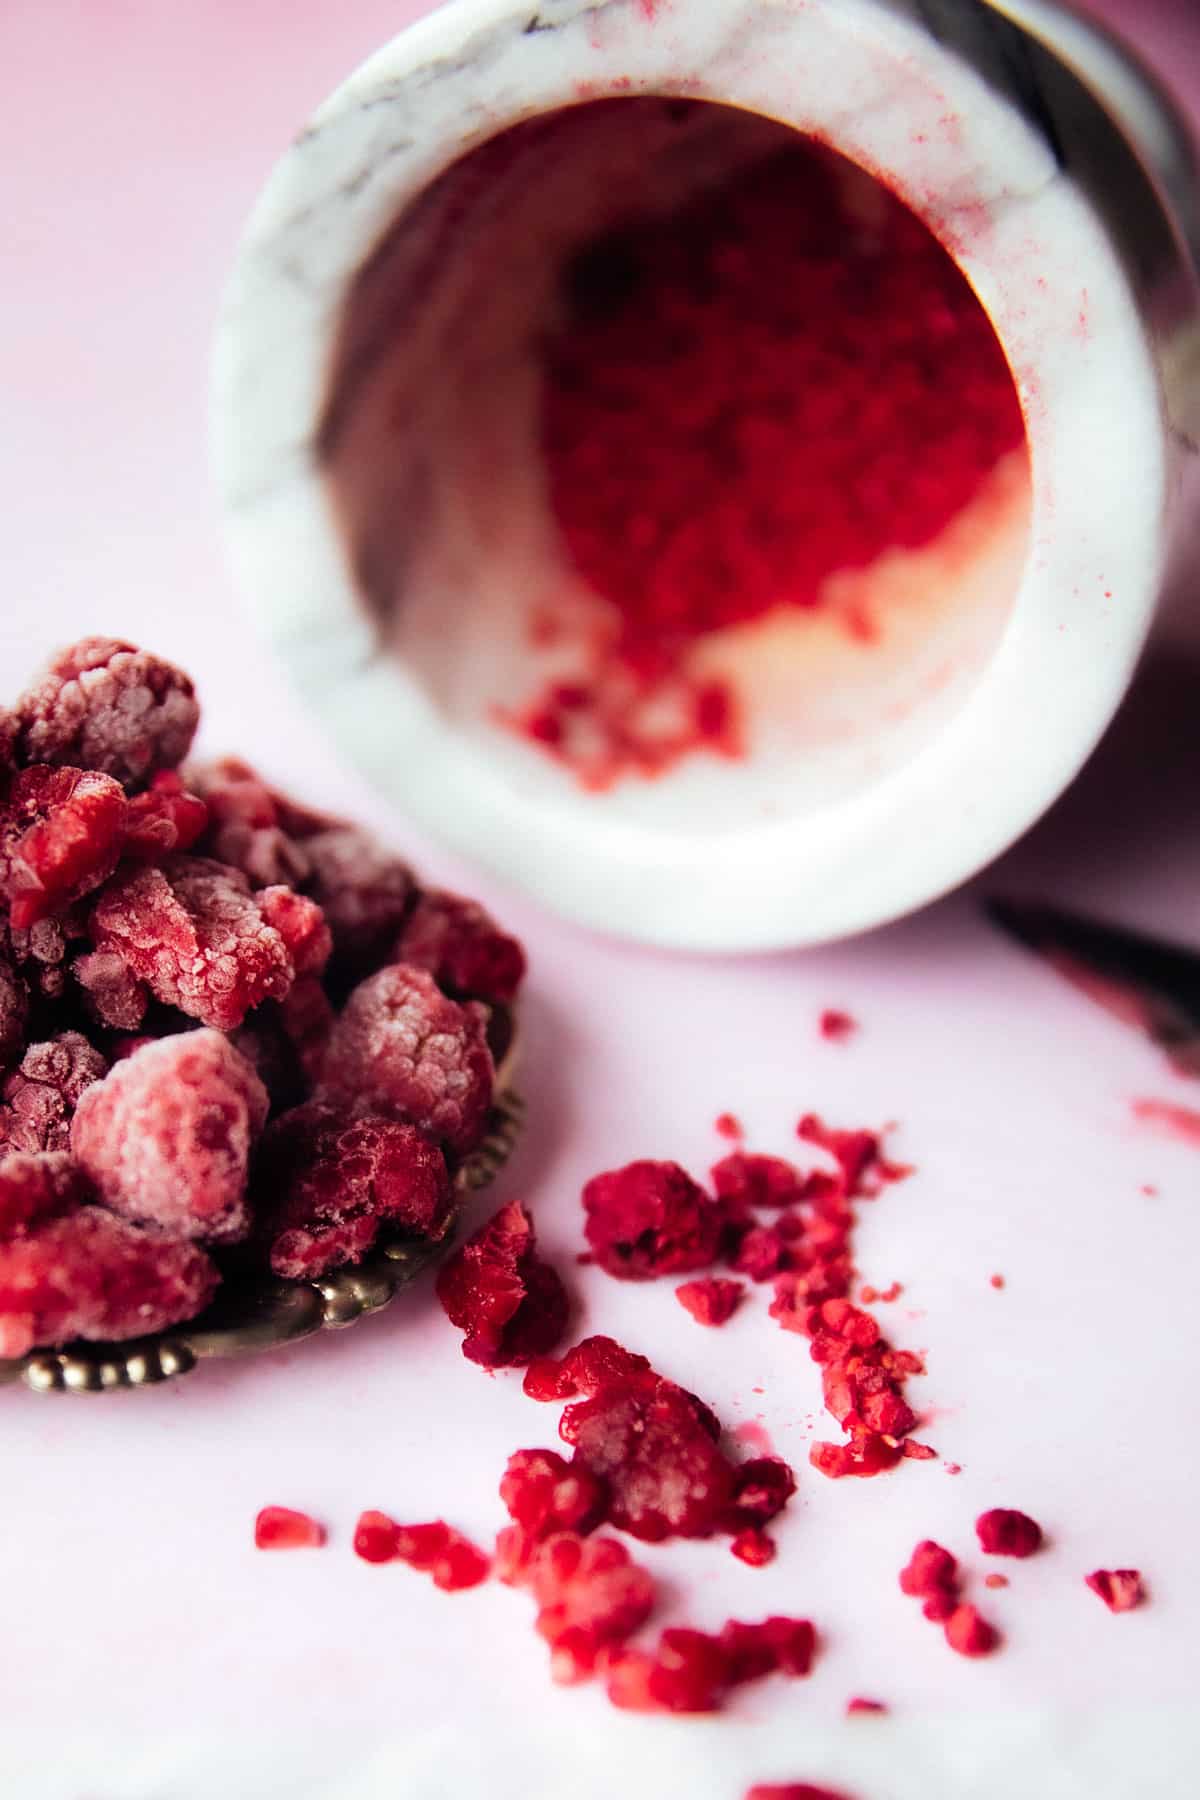 frozen and freeze-dried raspberries side by side